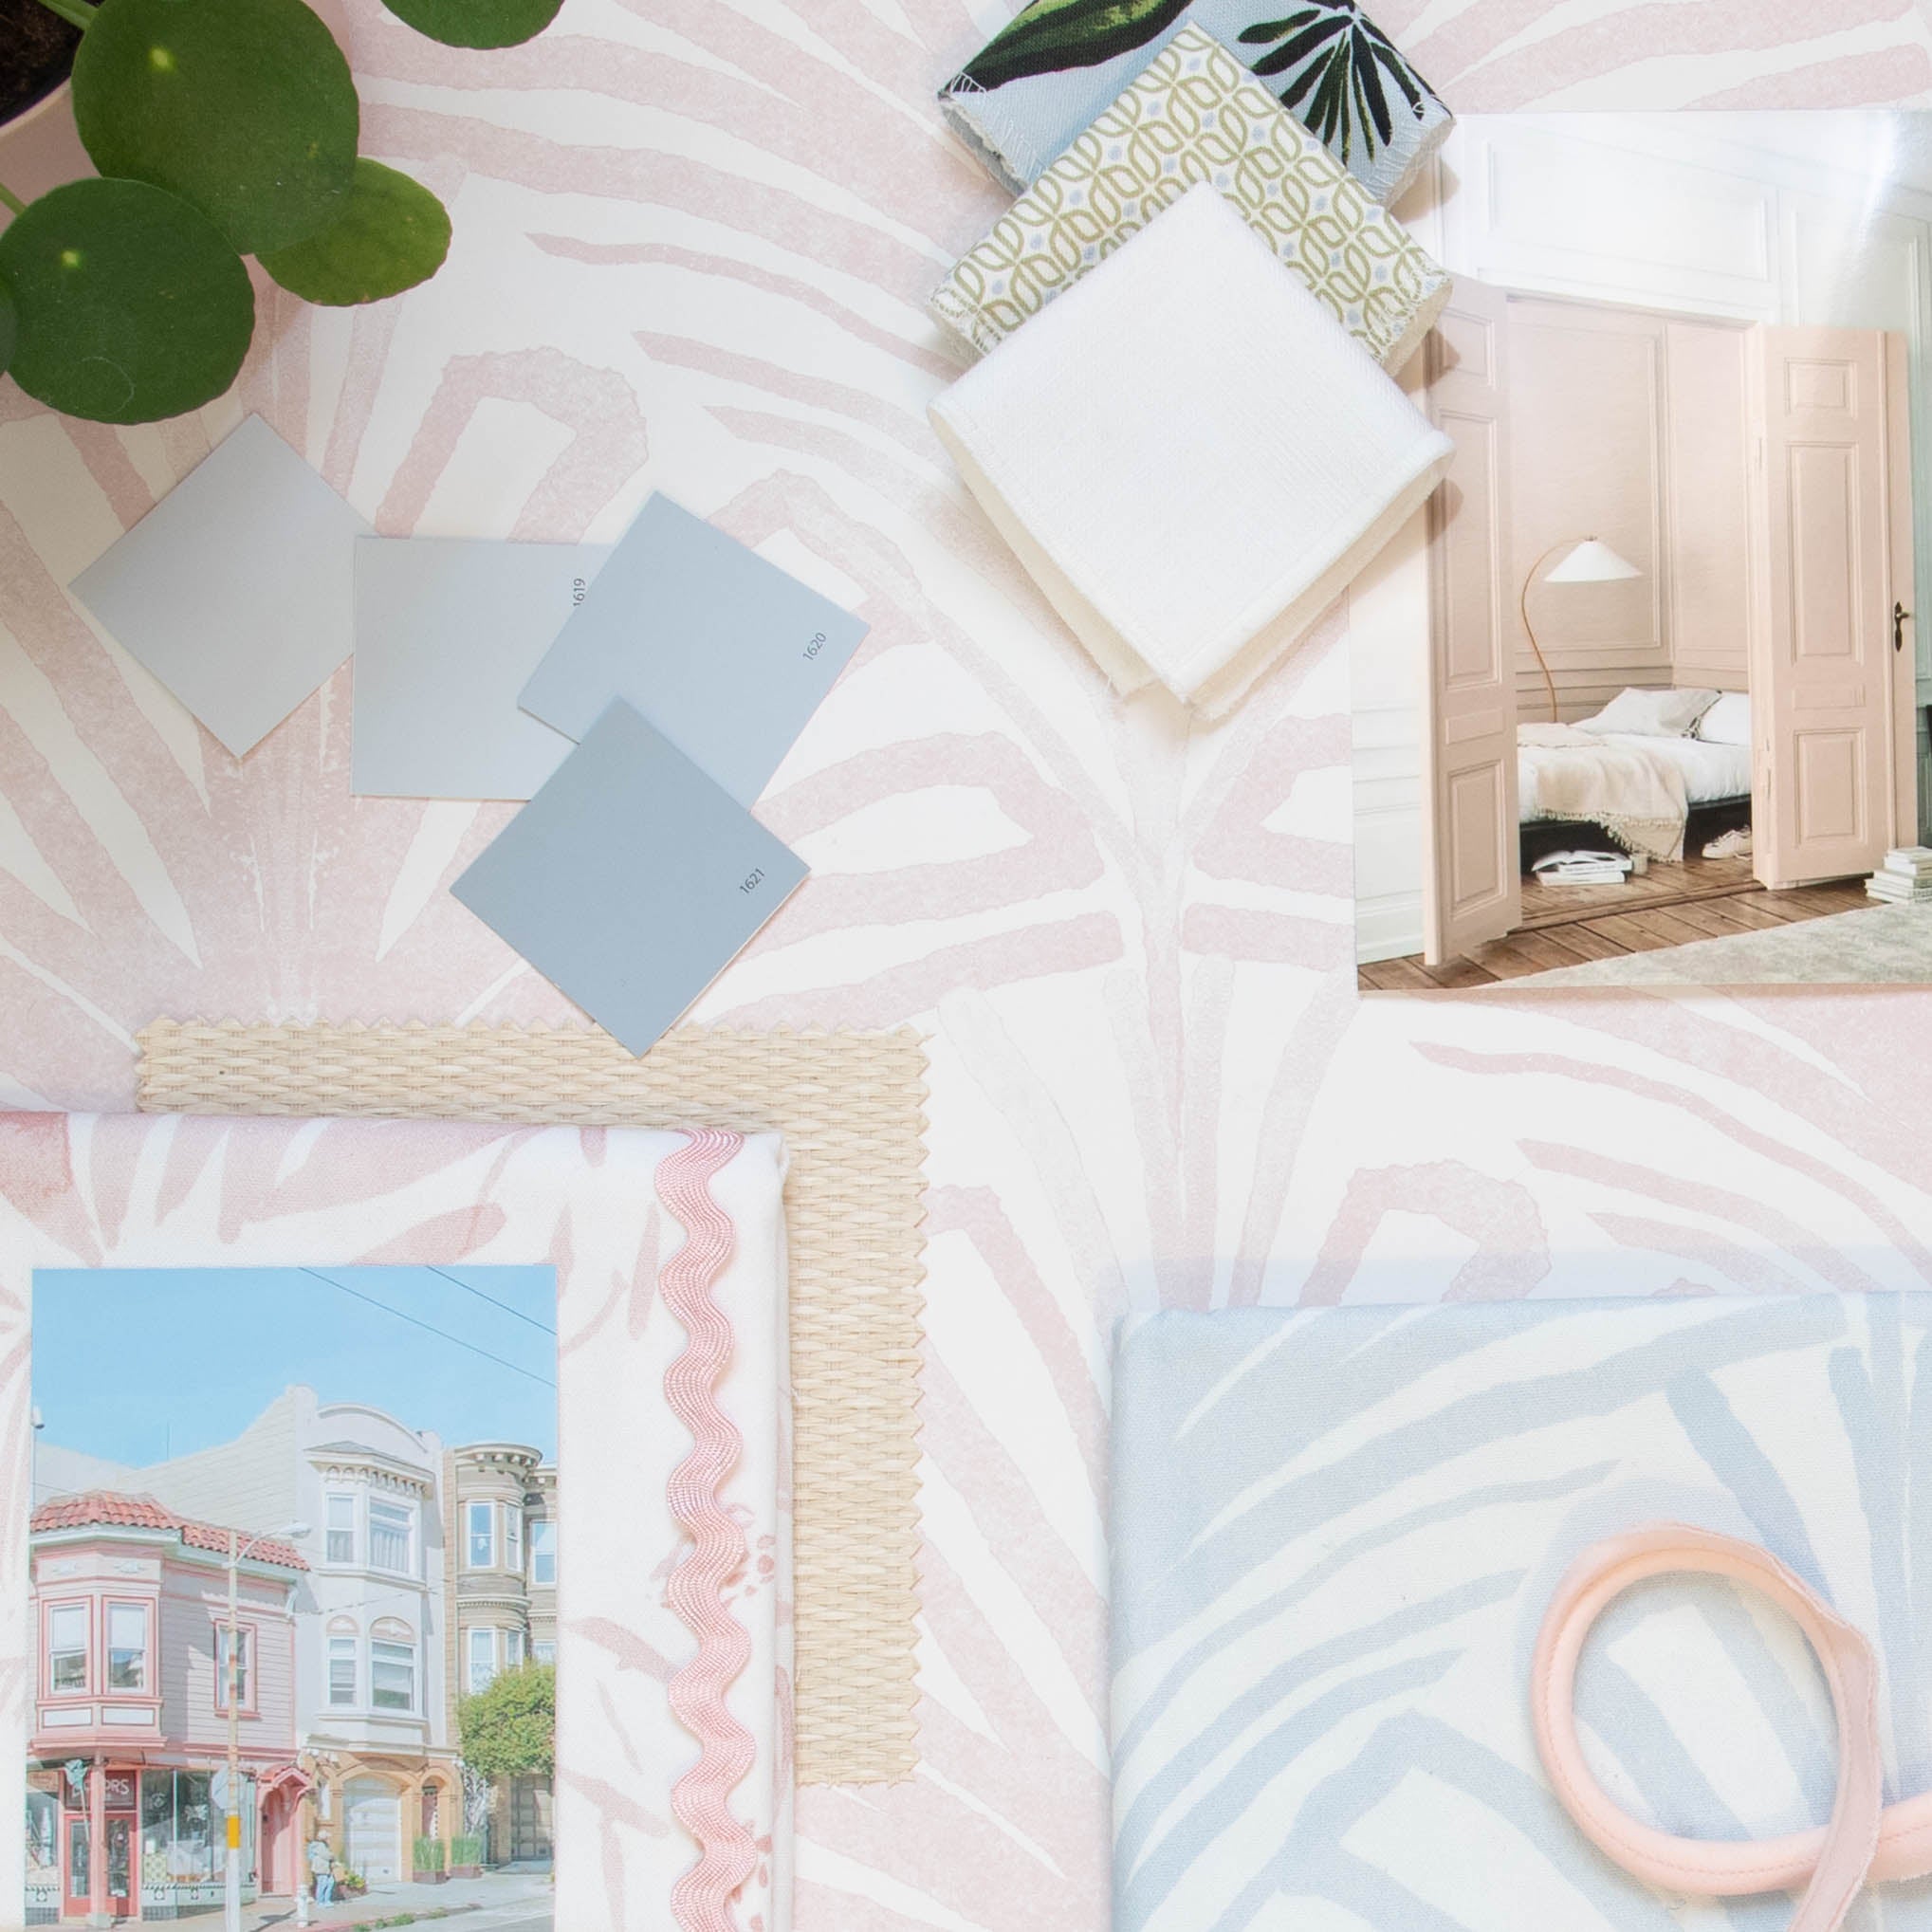 Interior design moodboard and fabric inspirations with Rose Pink Palm Printed Swatch, Sky Blue Palm Printed Swatch, and Moss Green Geometric Printed Swatch